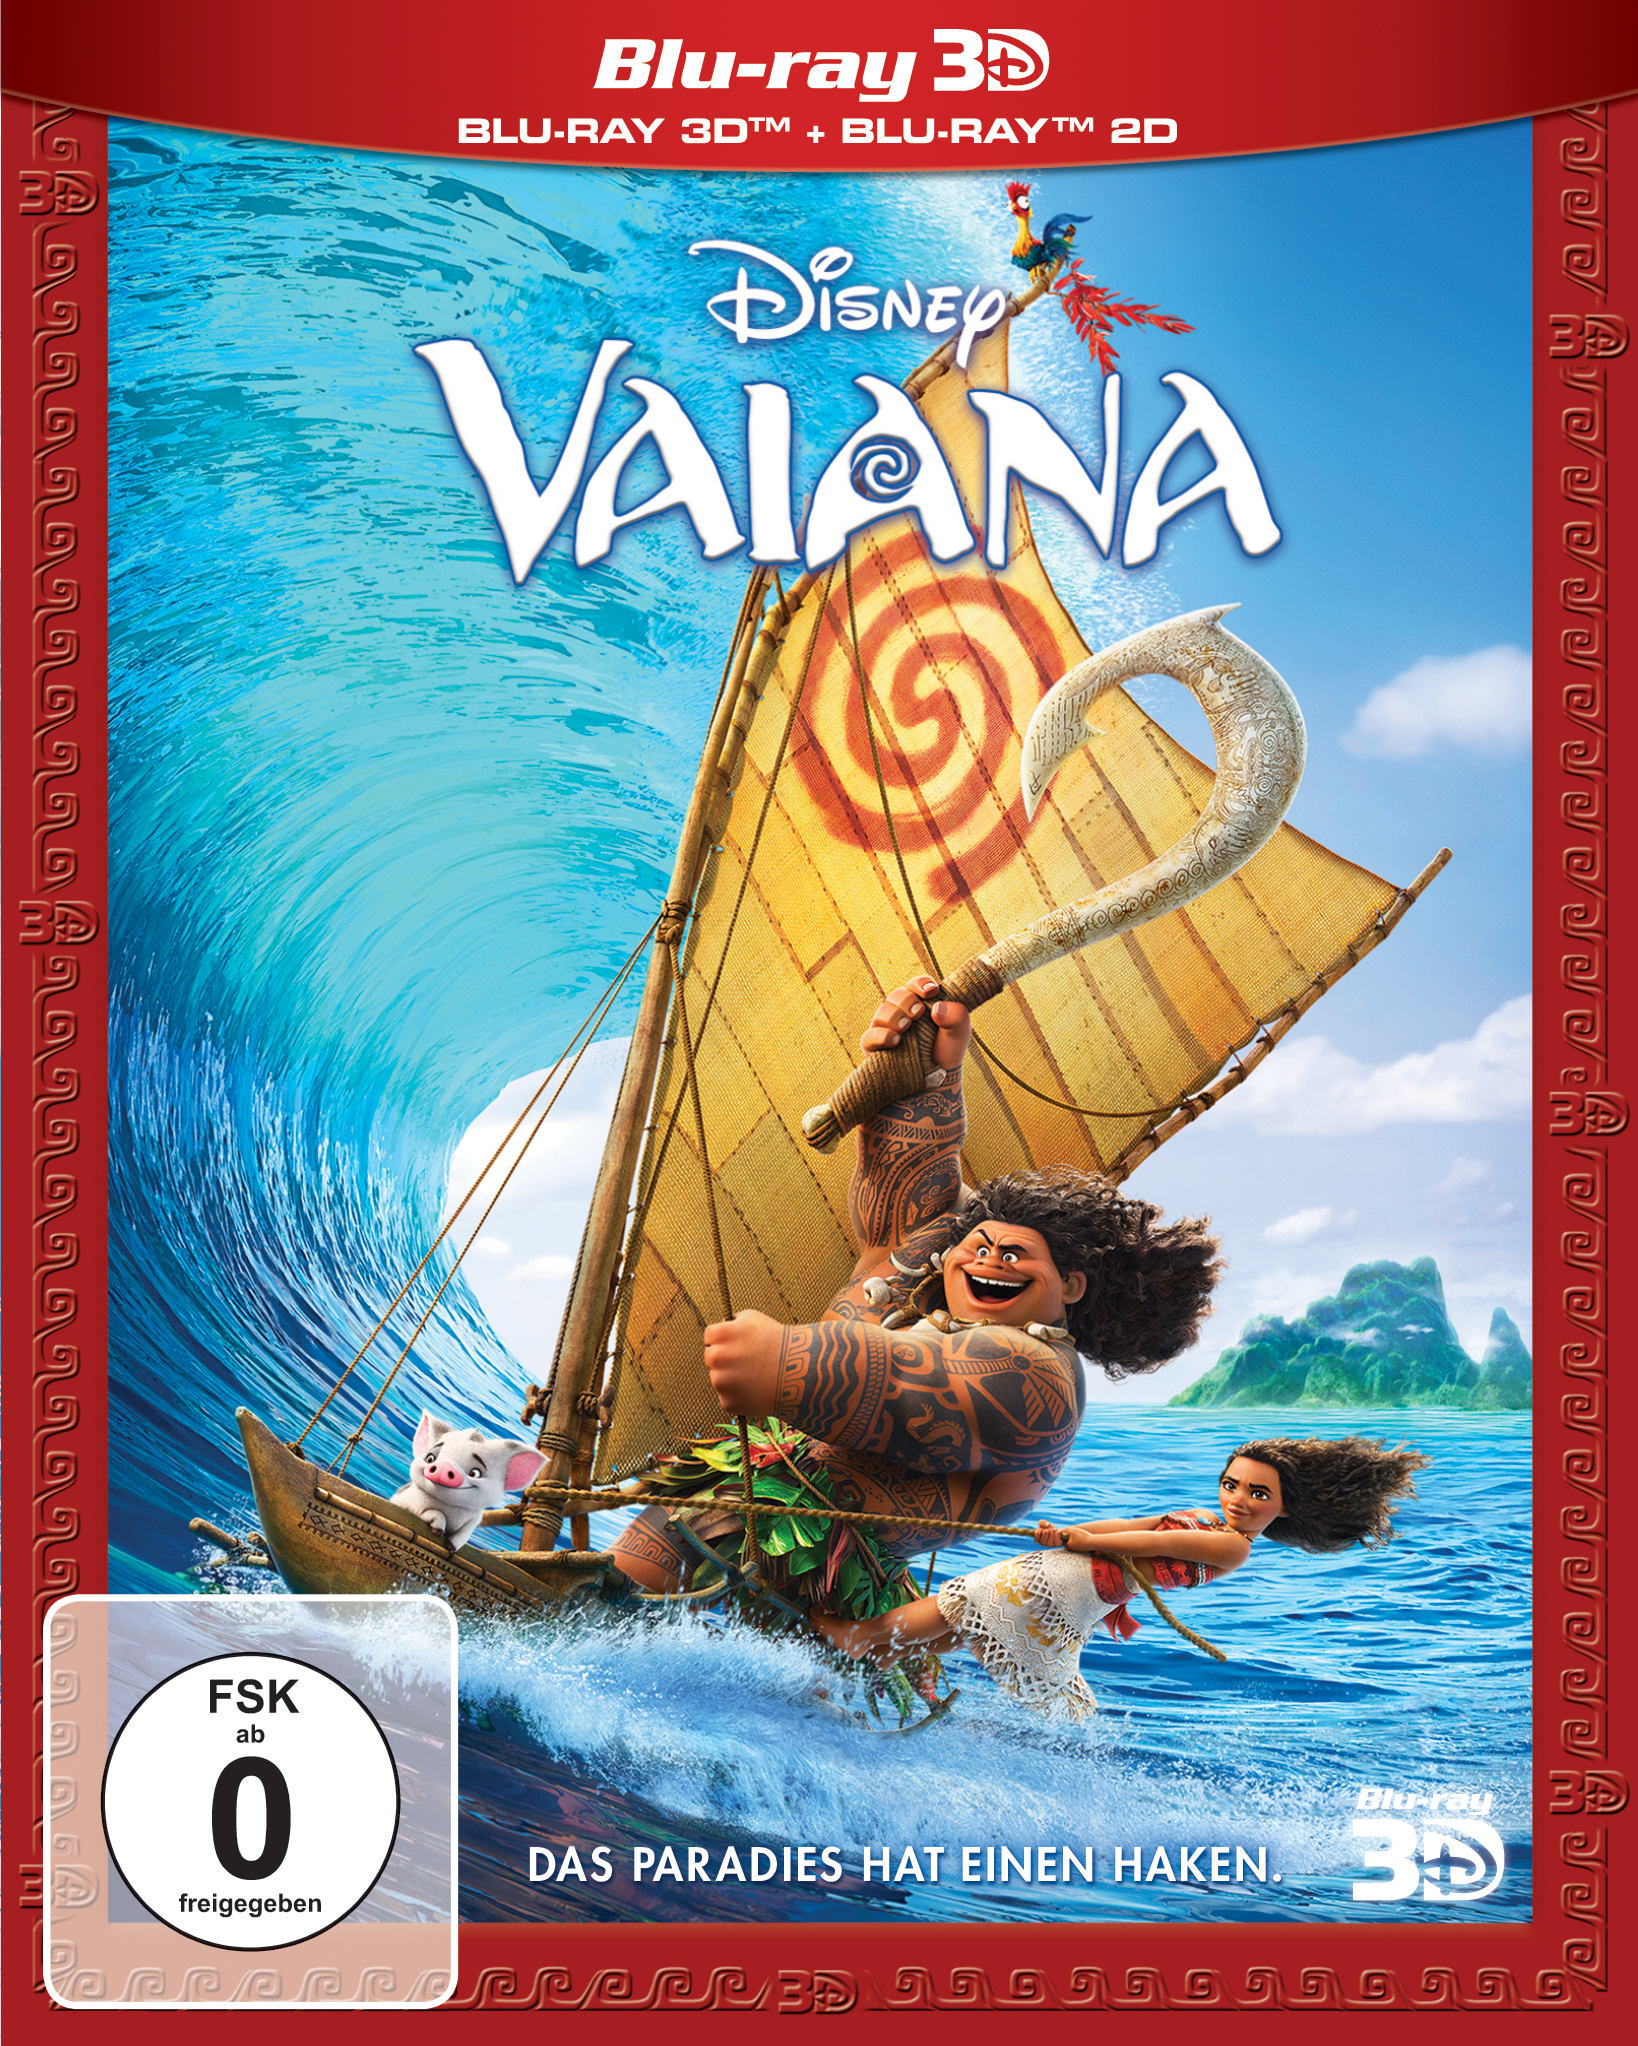 (+2D) Blu-ray Vaiana 3D Edition) (Special